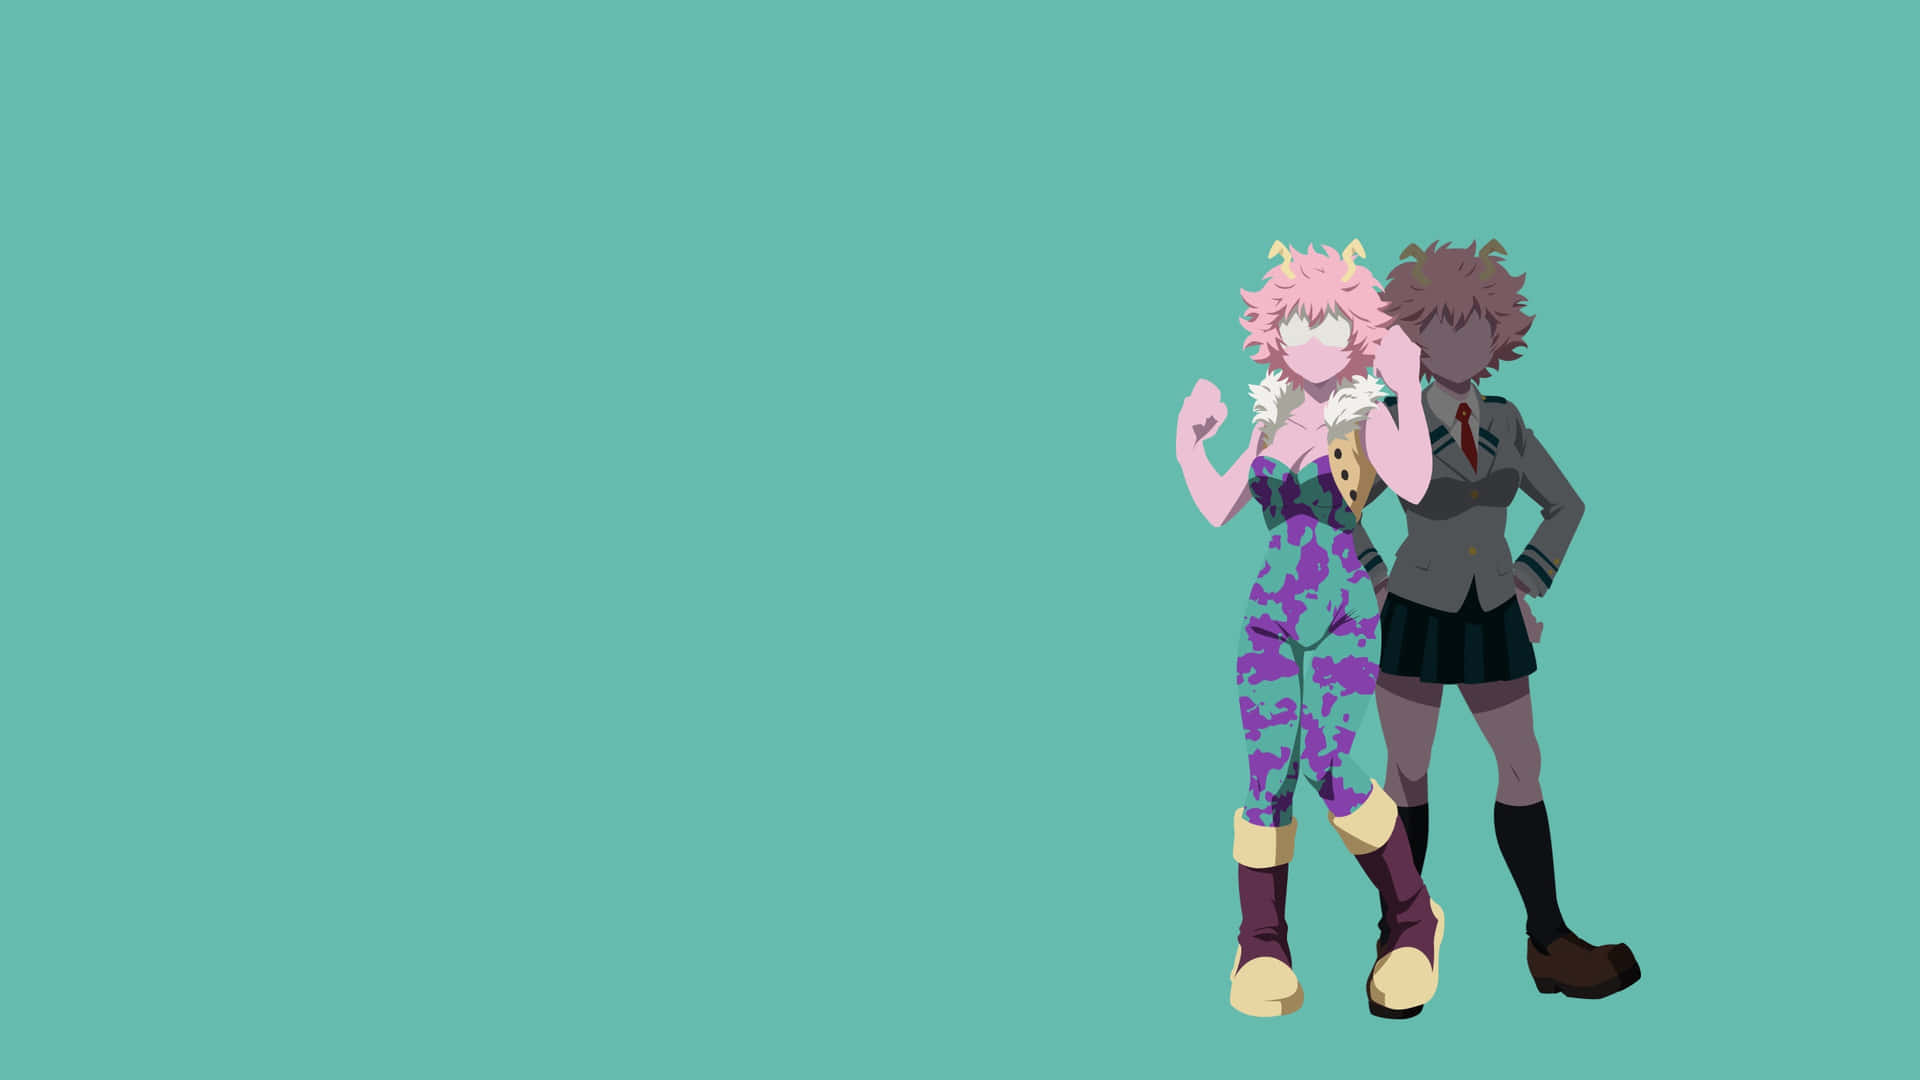 Transform your space with the Ashido Wallpaper